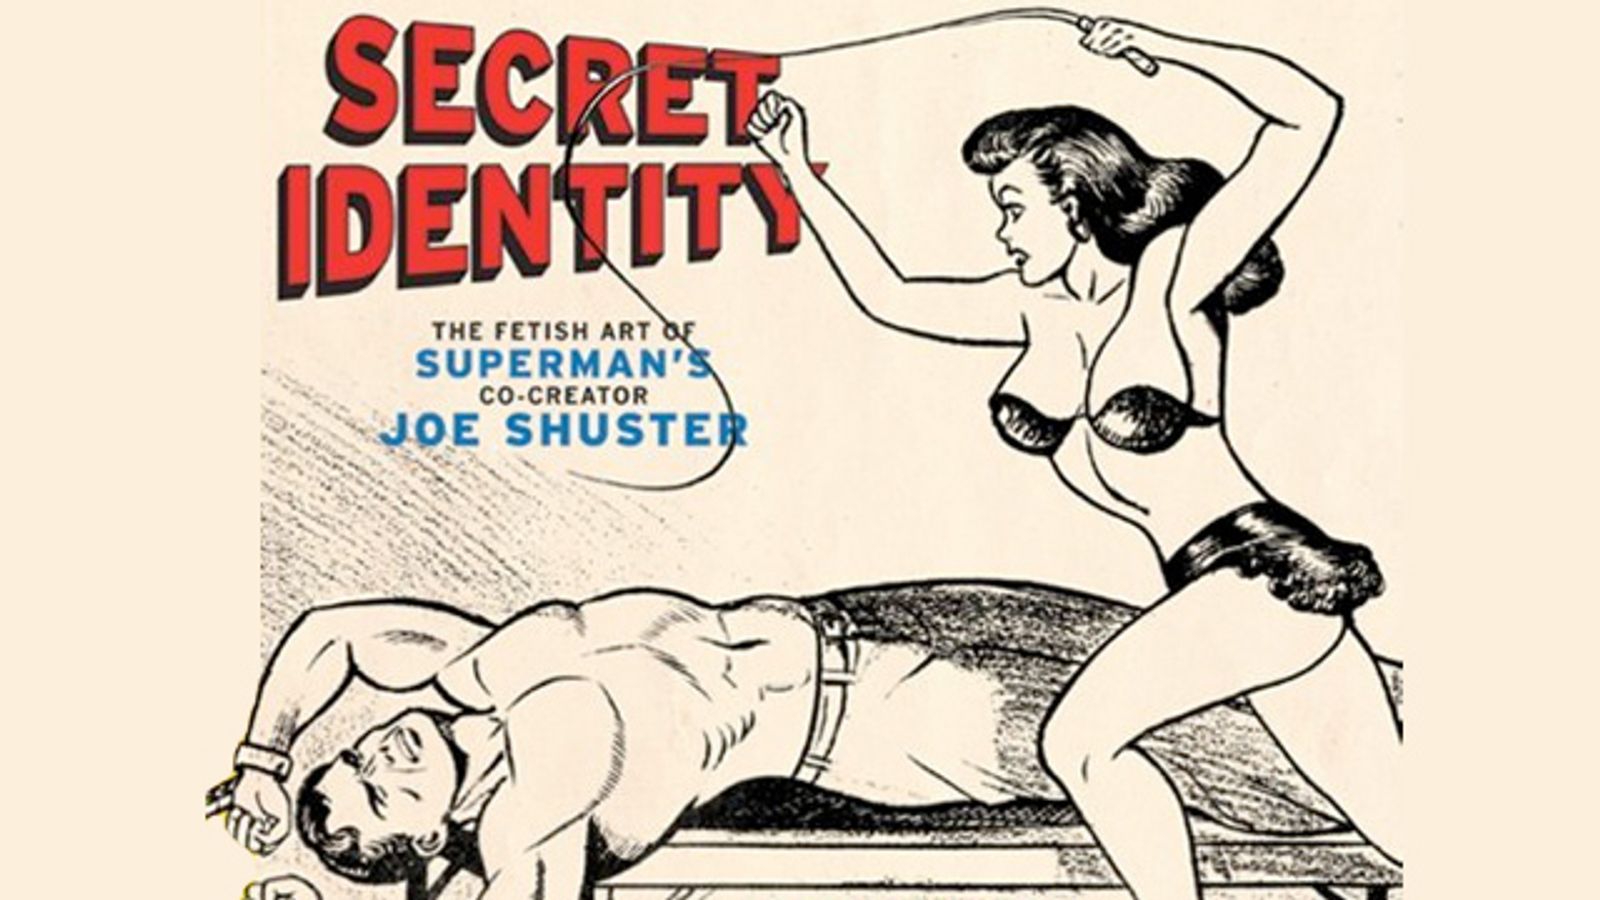 Hollywood Options Book About Superman Artist's Secret S/M Drawings